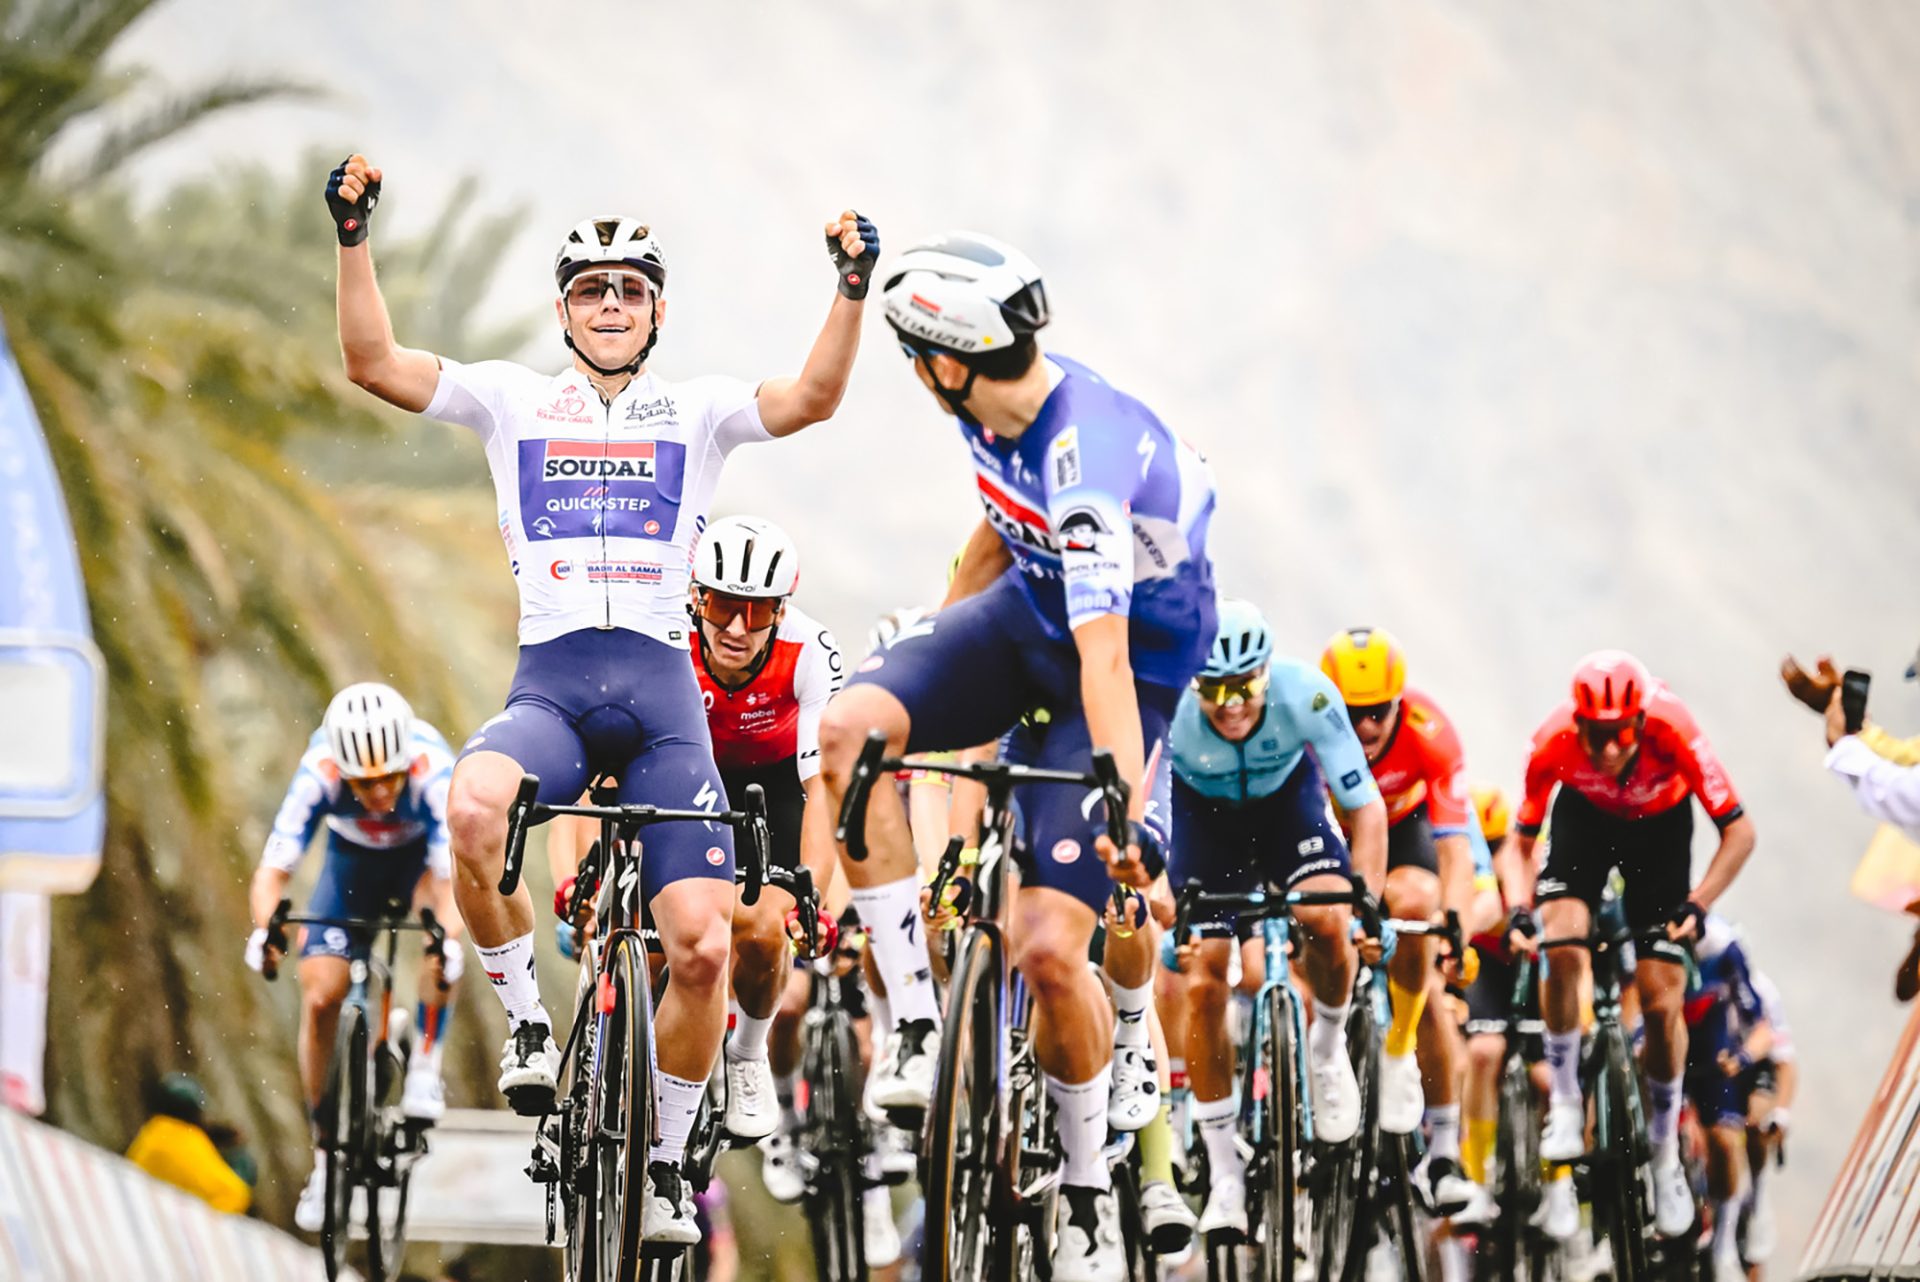 Paul Mangier wins Tour of Oman stage 3.